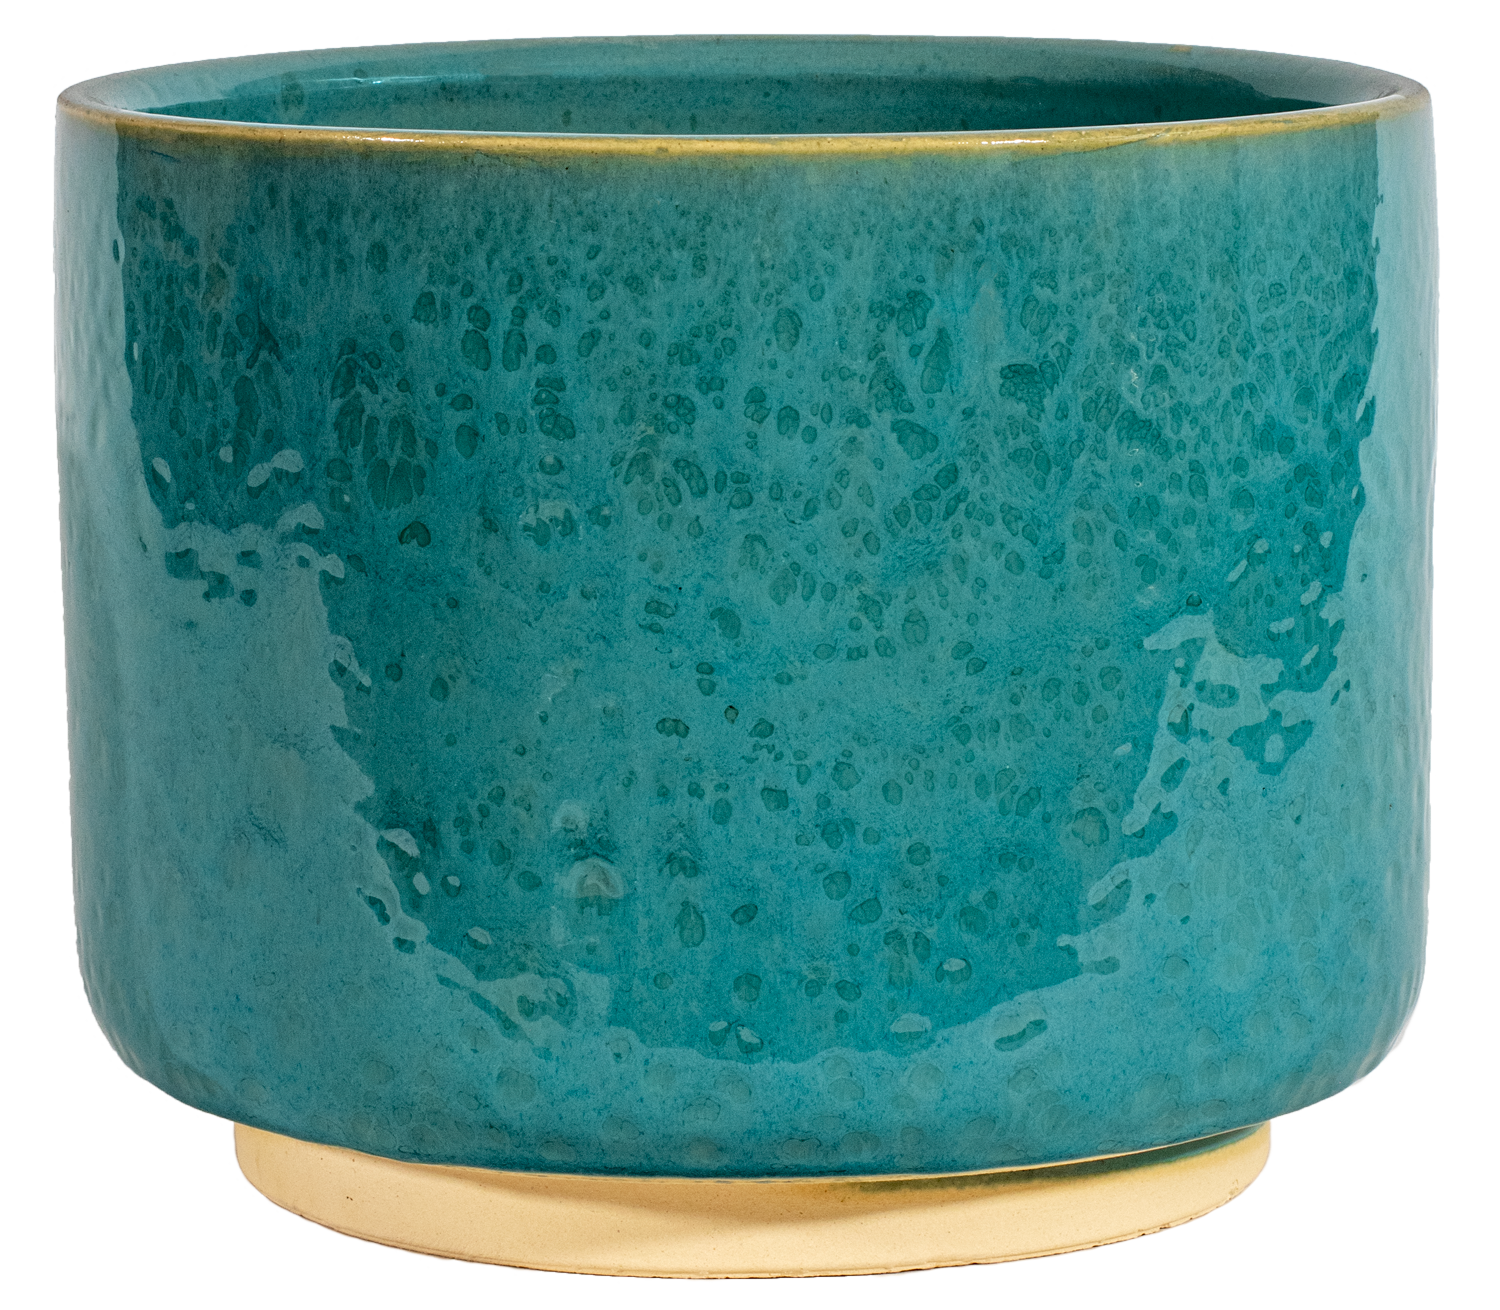 medium turquoise ceramic cylinder planter in a modern style with small pedestal foot